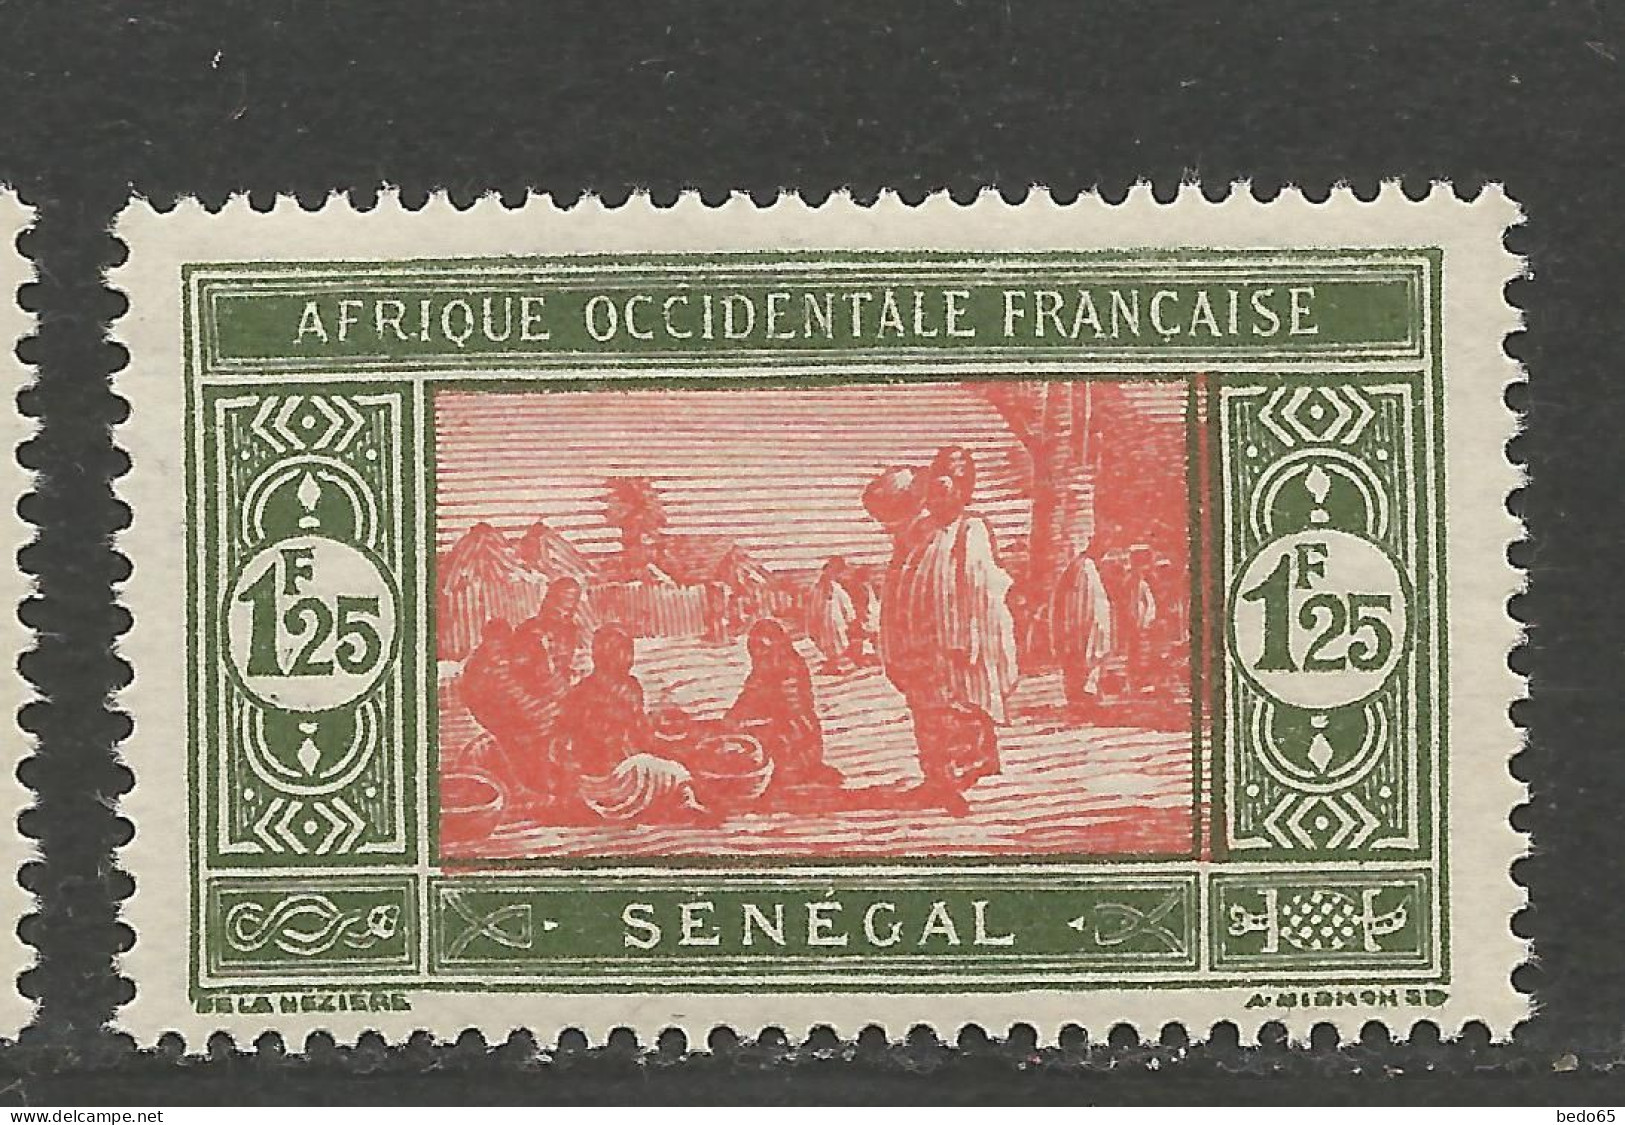 SENEGAL N° 107A NEUF* TRACE DE CHARNIERE  / Hinge / MH - Unused Stamps